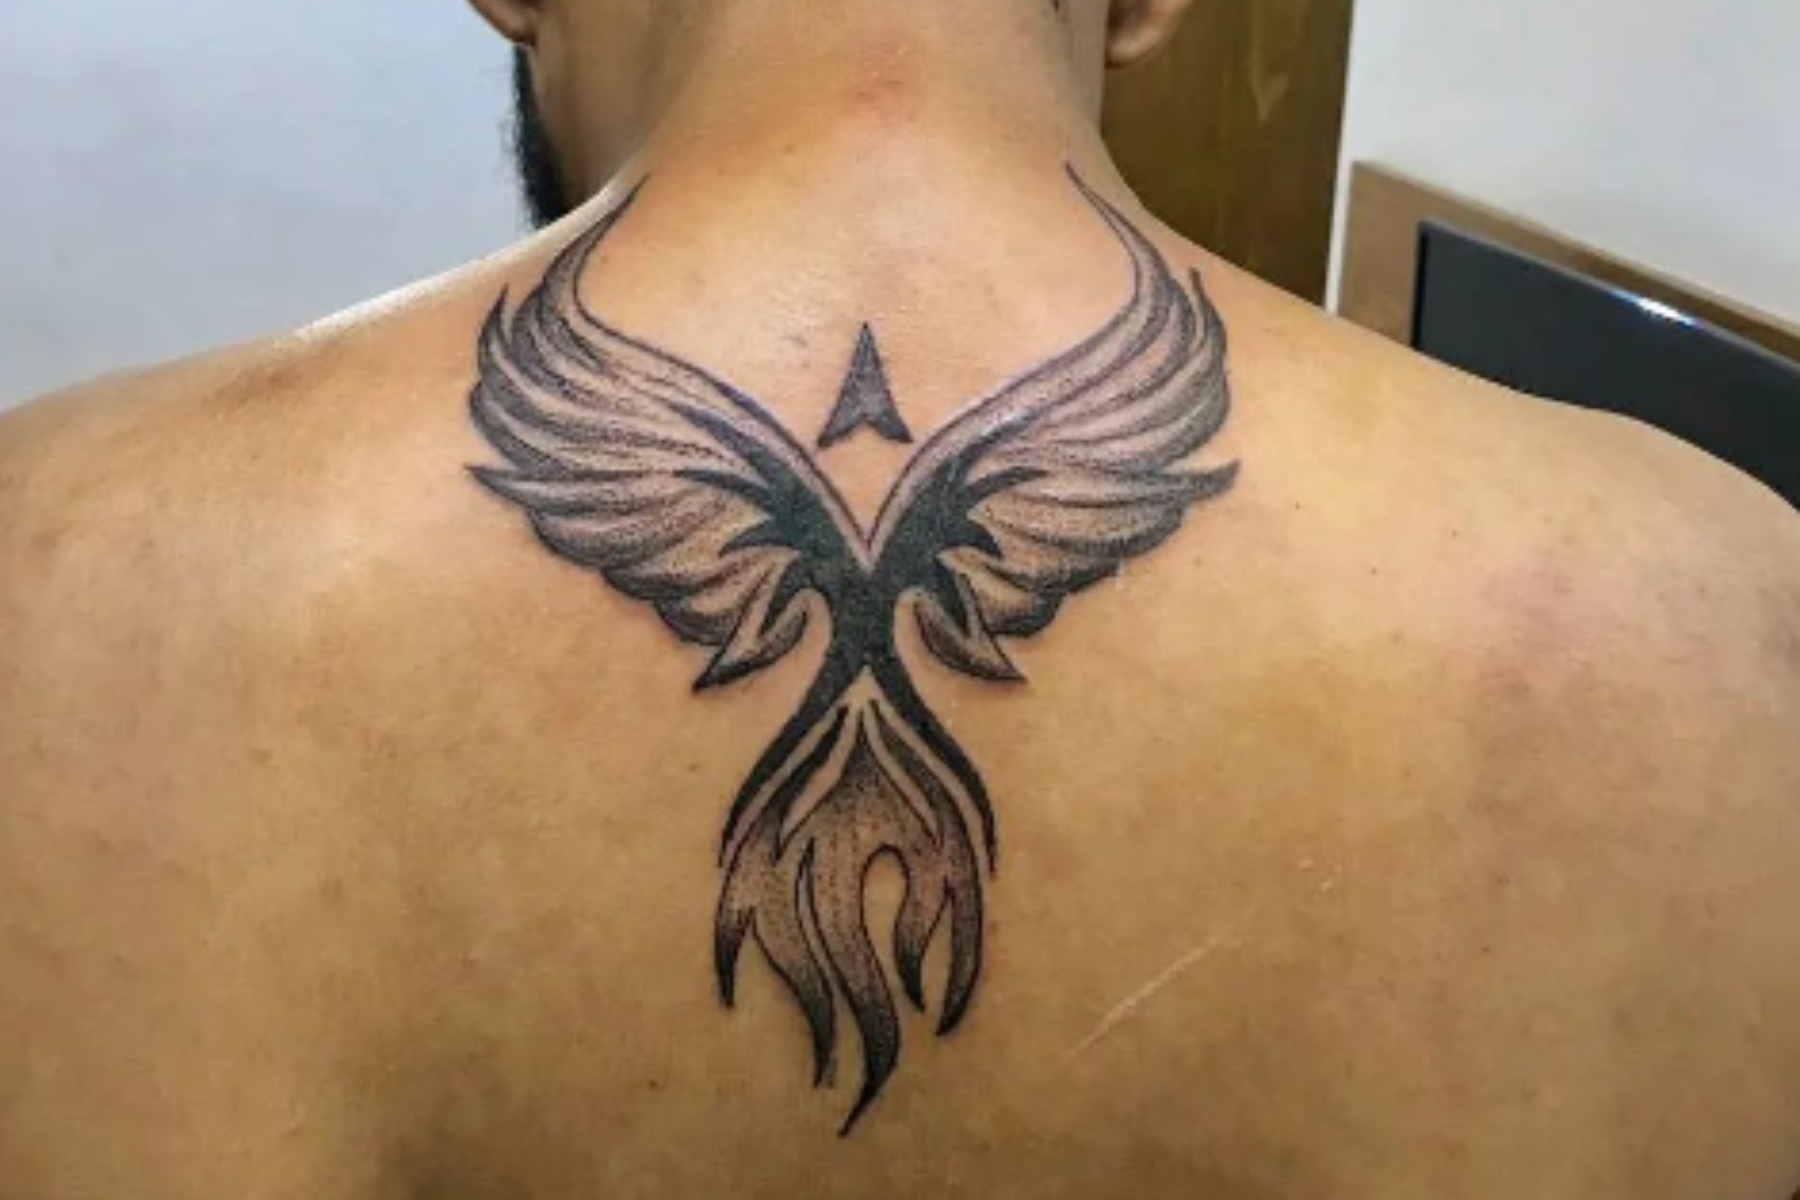 A man has a phoenix tattoo on his upper middle part